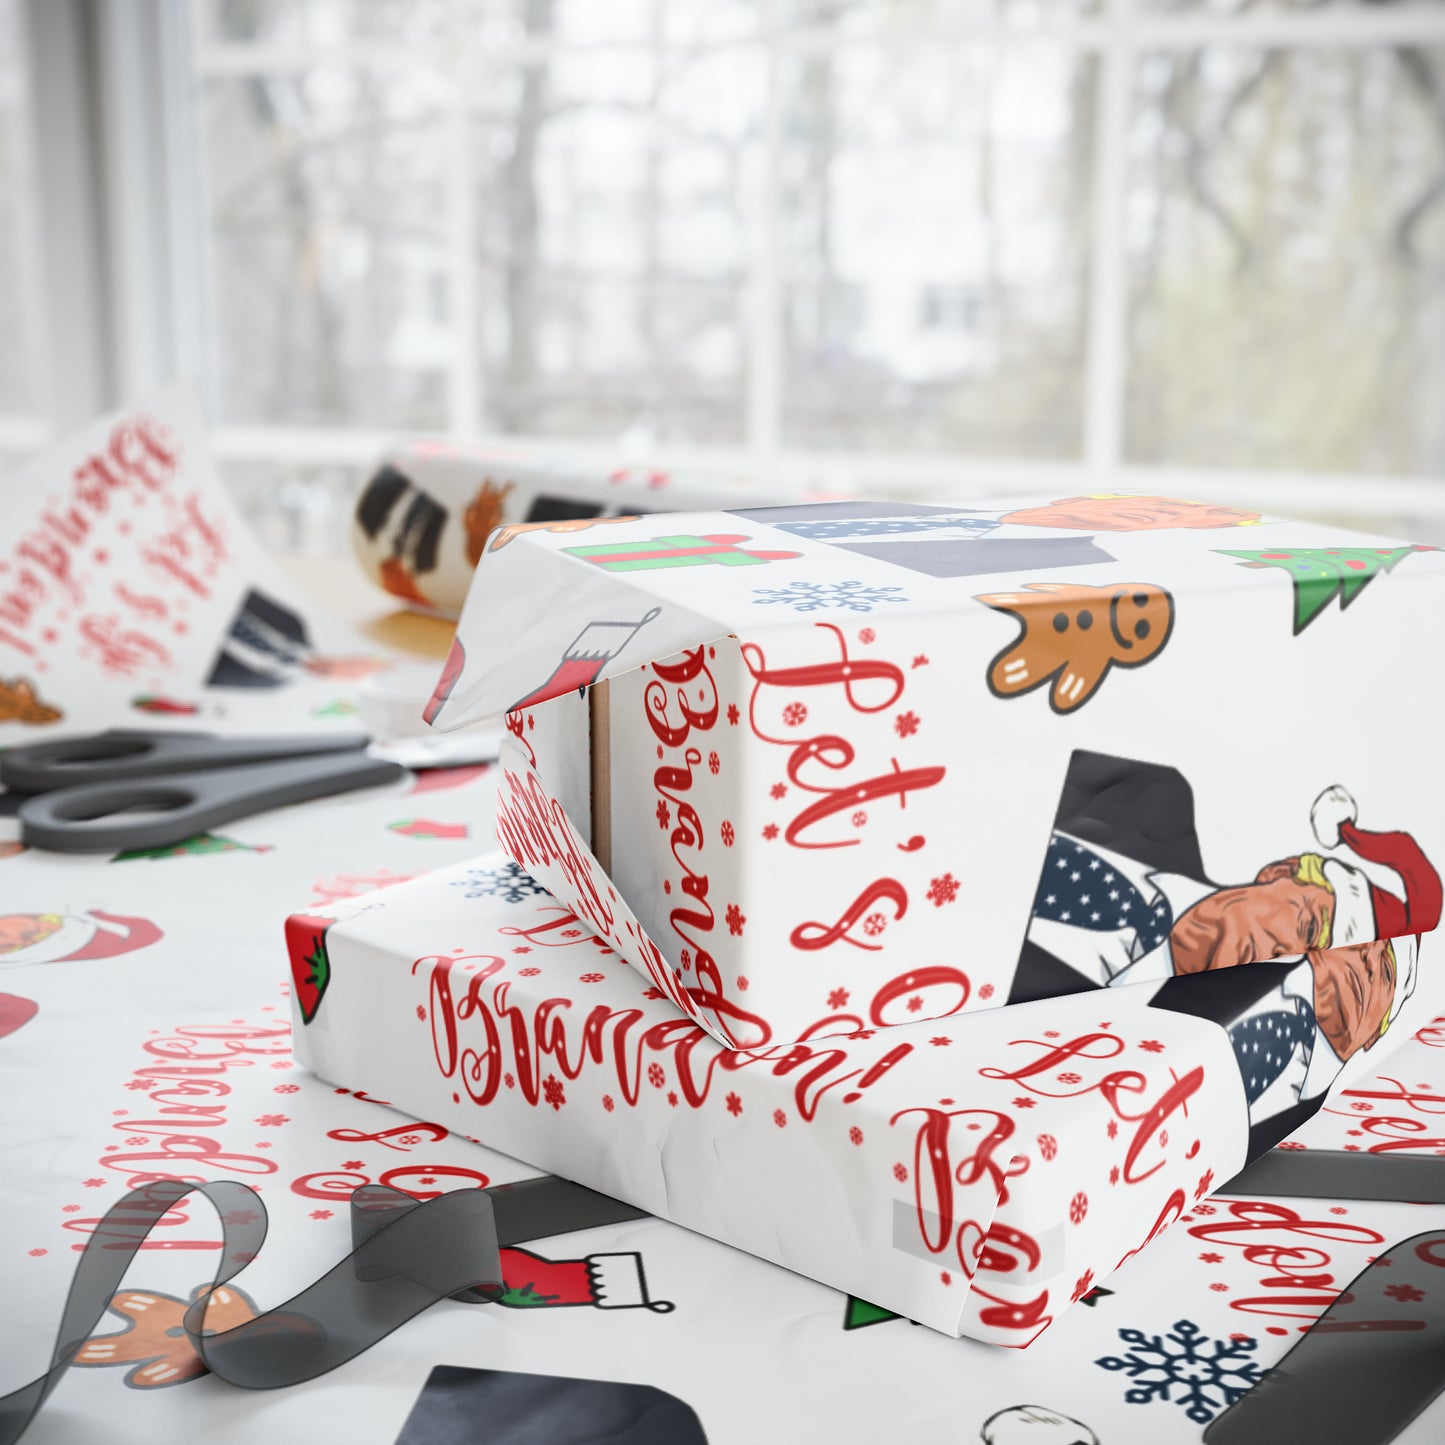 The Best Trump Wrapping Paper for Gifts - Pro Trump Santa Let's Go Brandon Christmas Gift Wrap